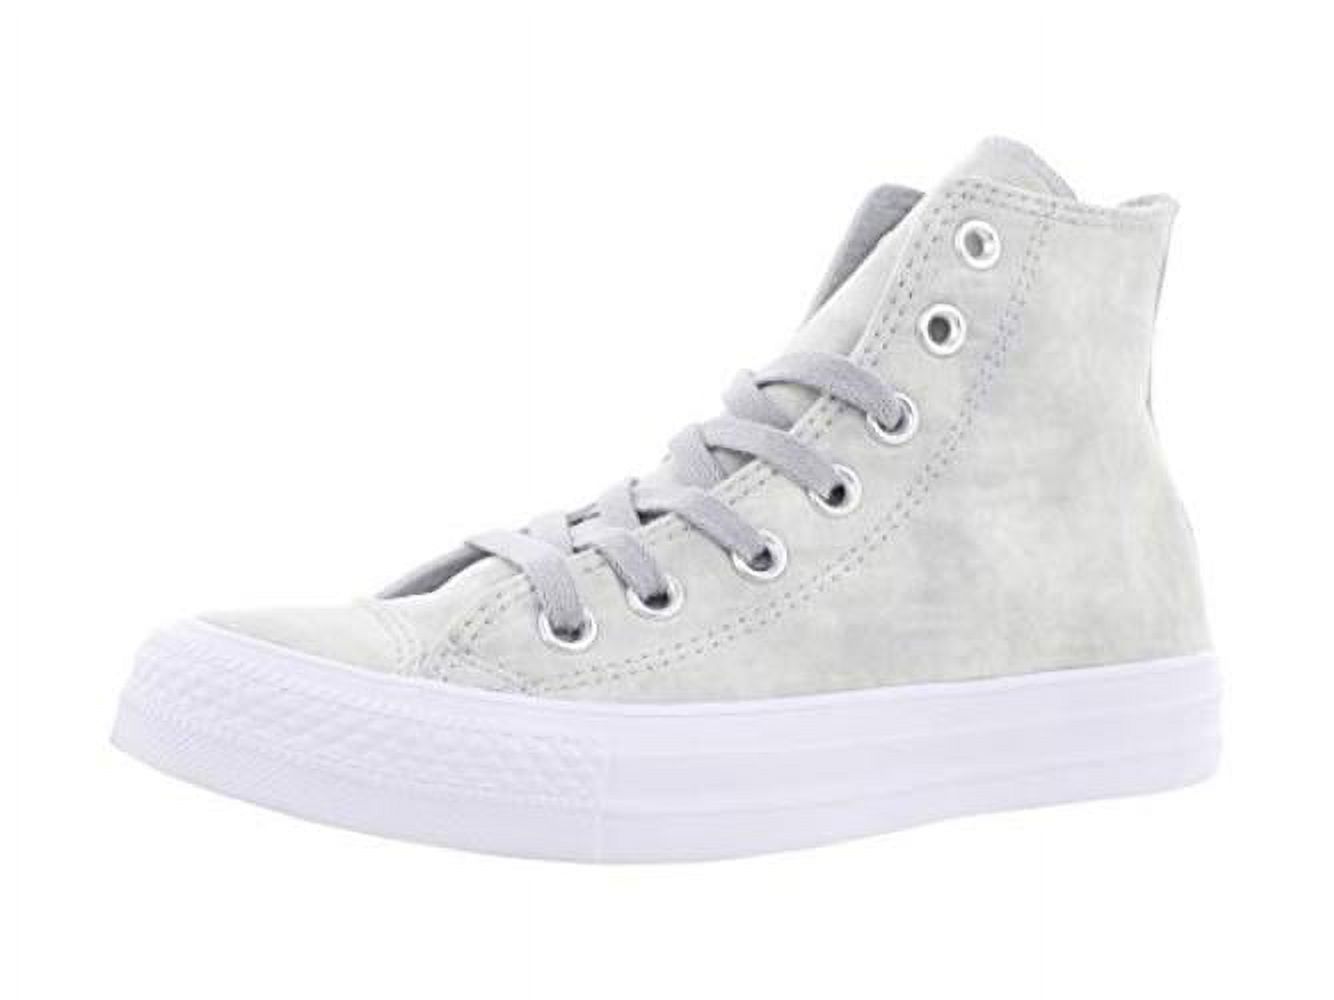 Converse Womens ctas hi Hight Top Lace Up Fashion Sneakers - image 1 of 4